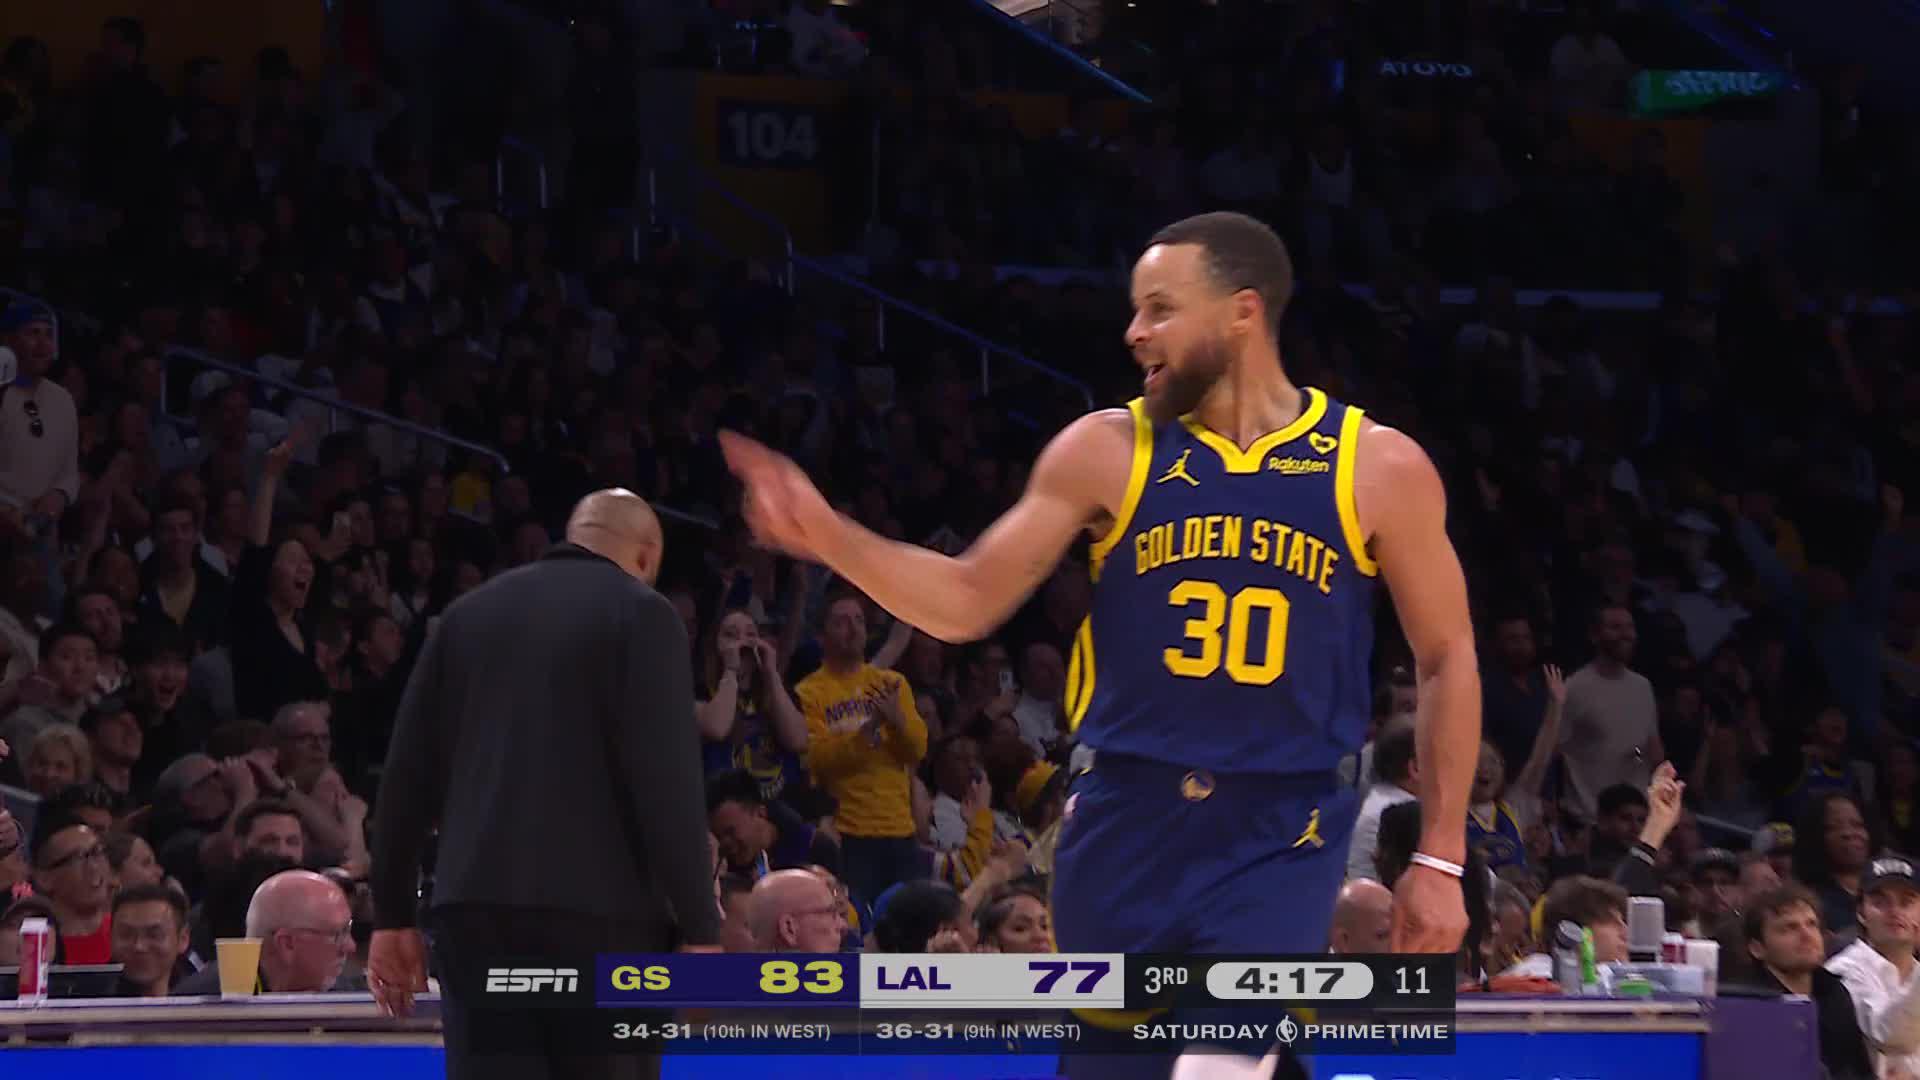 Stephen Curry and Warriors Impress Fans with Win against LeBron and Lakers in Tight NBA Playoff Race